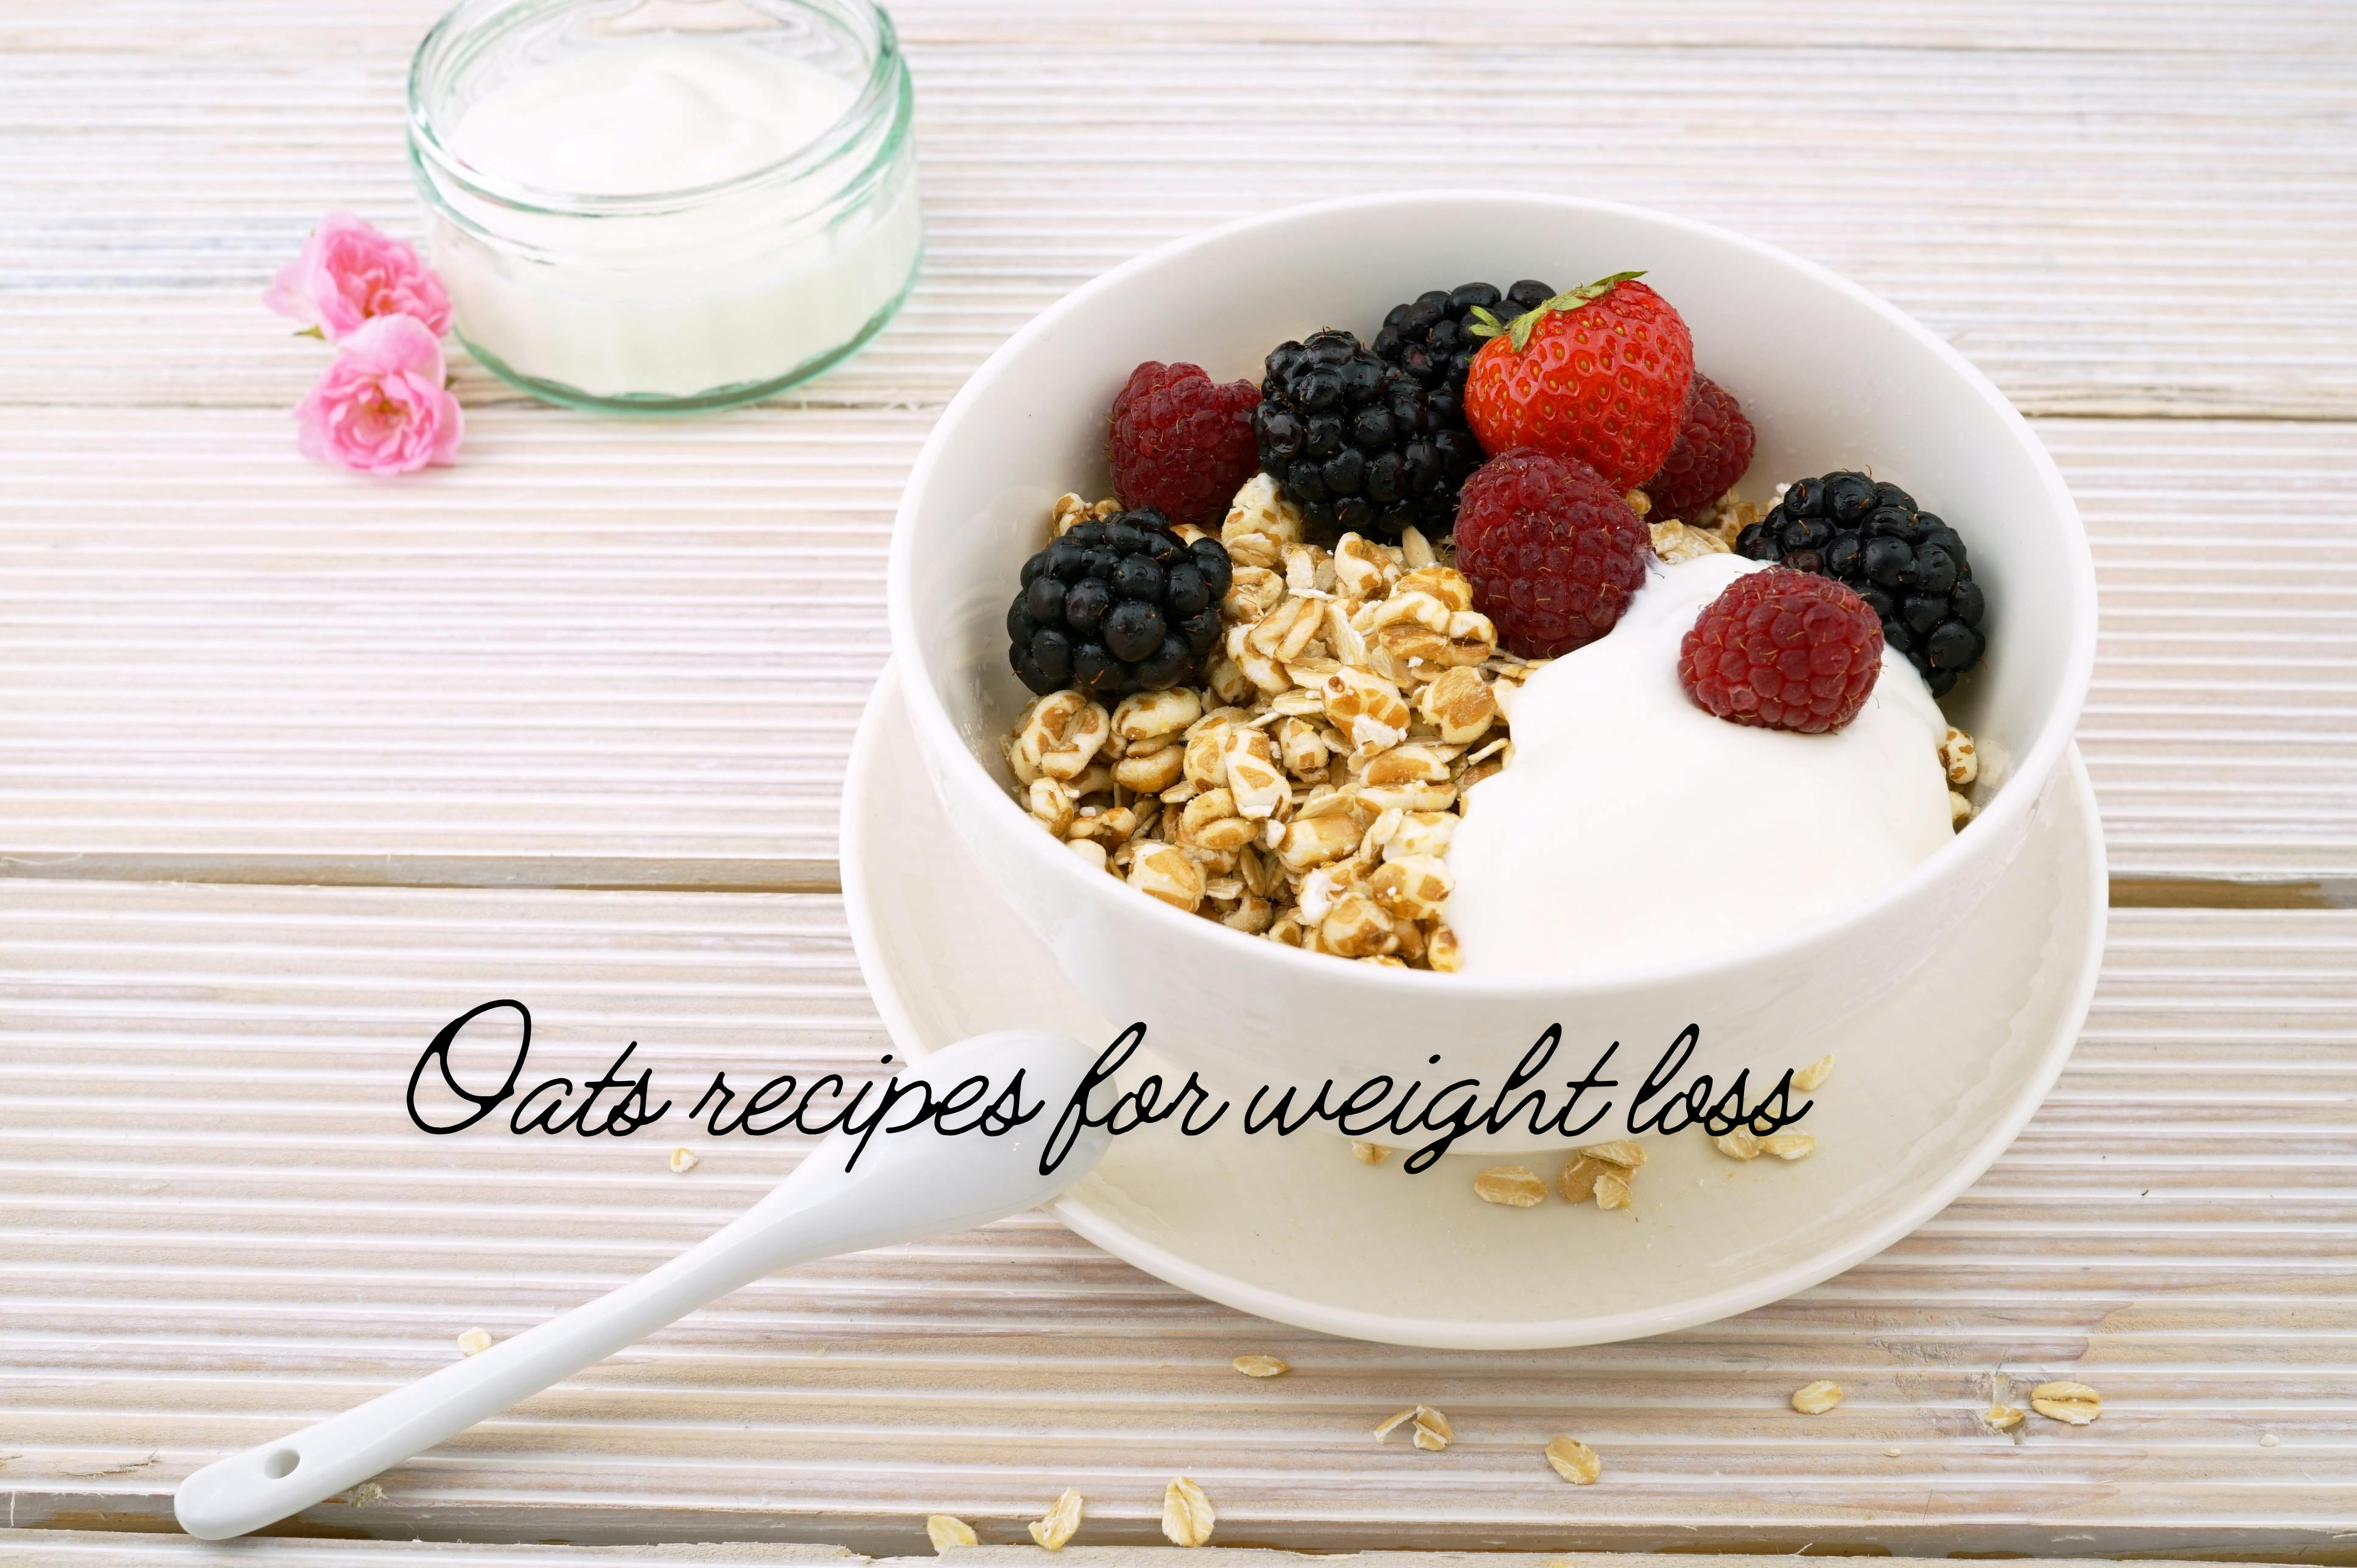 Delicious Oats Recipes to Kickstart Your Weight Loss Journey